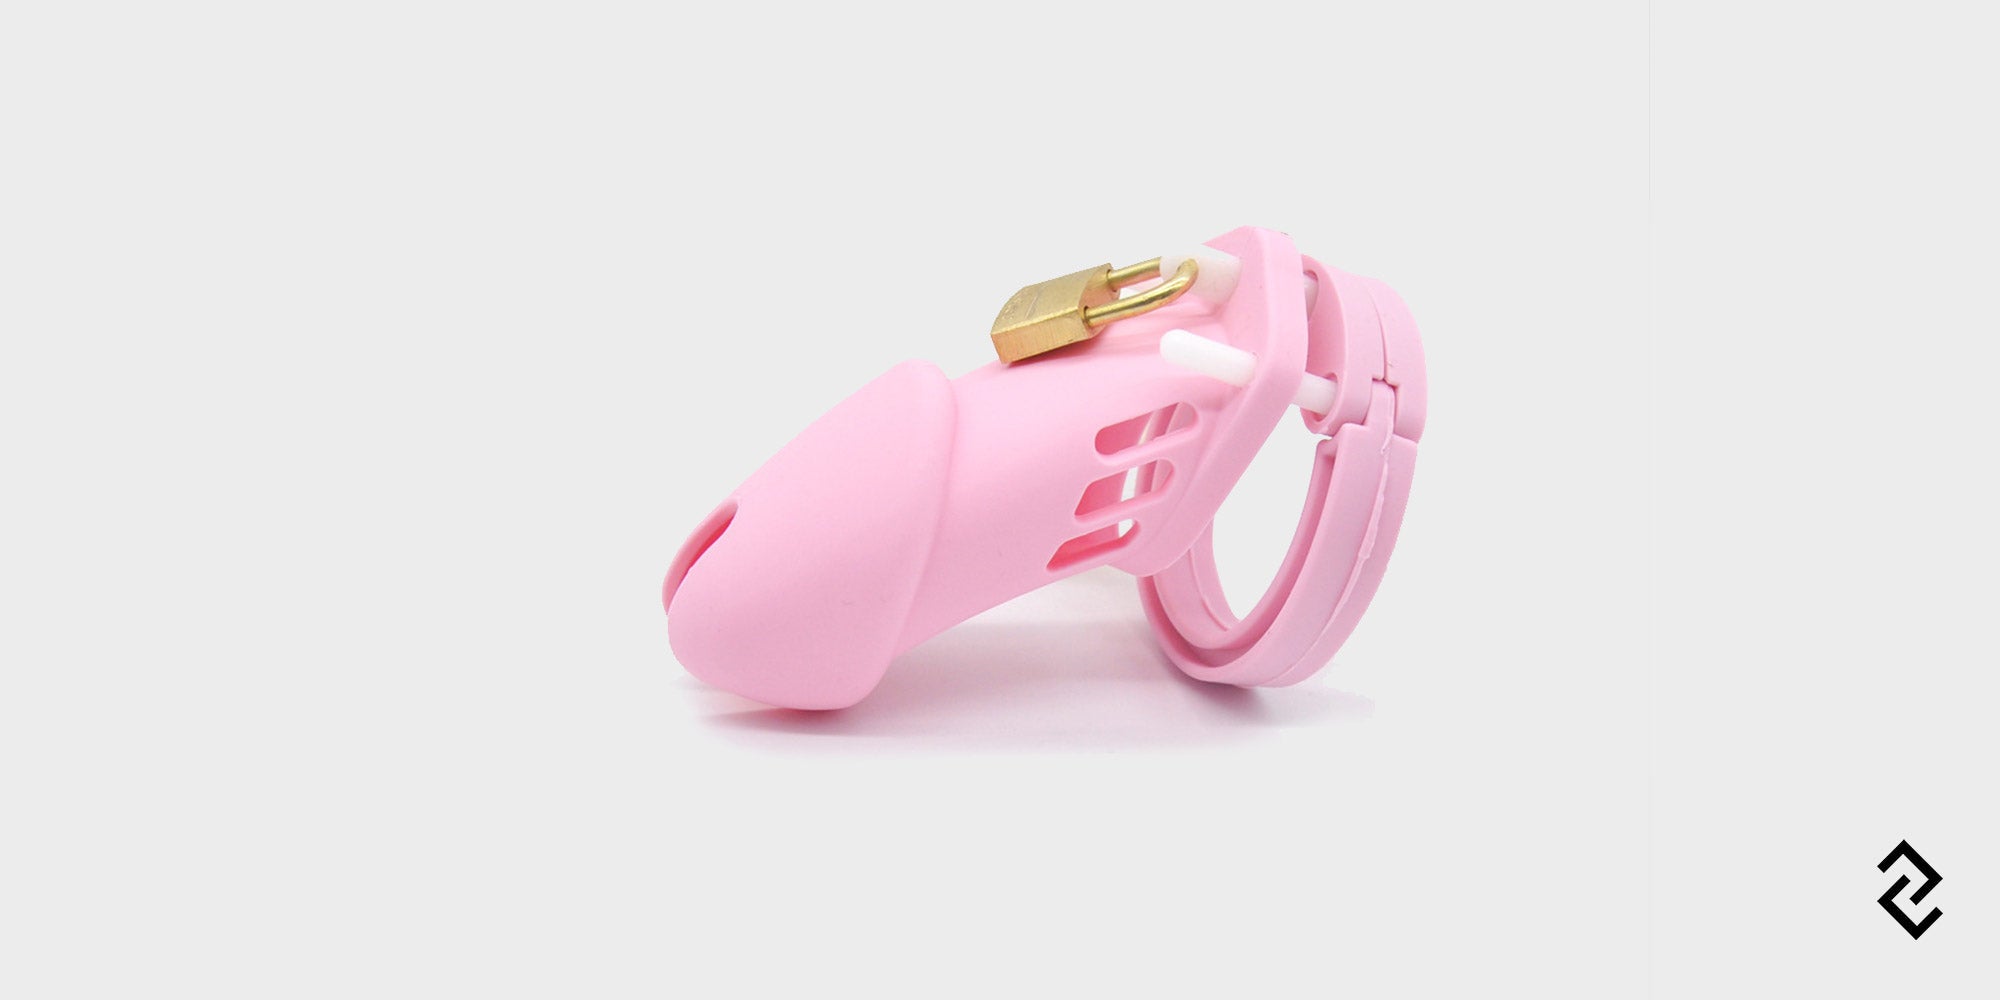 cb6000 is a pink chastity cage made of soft silicone